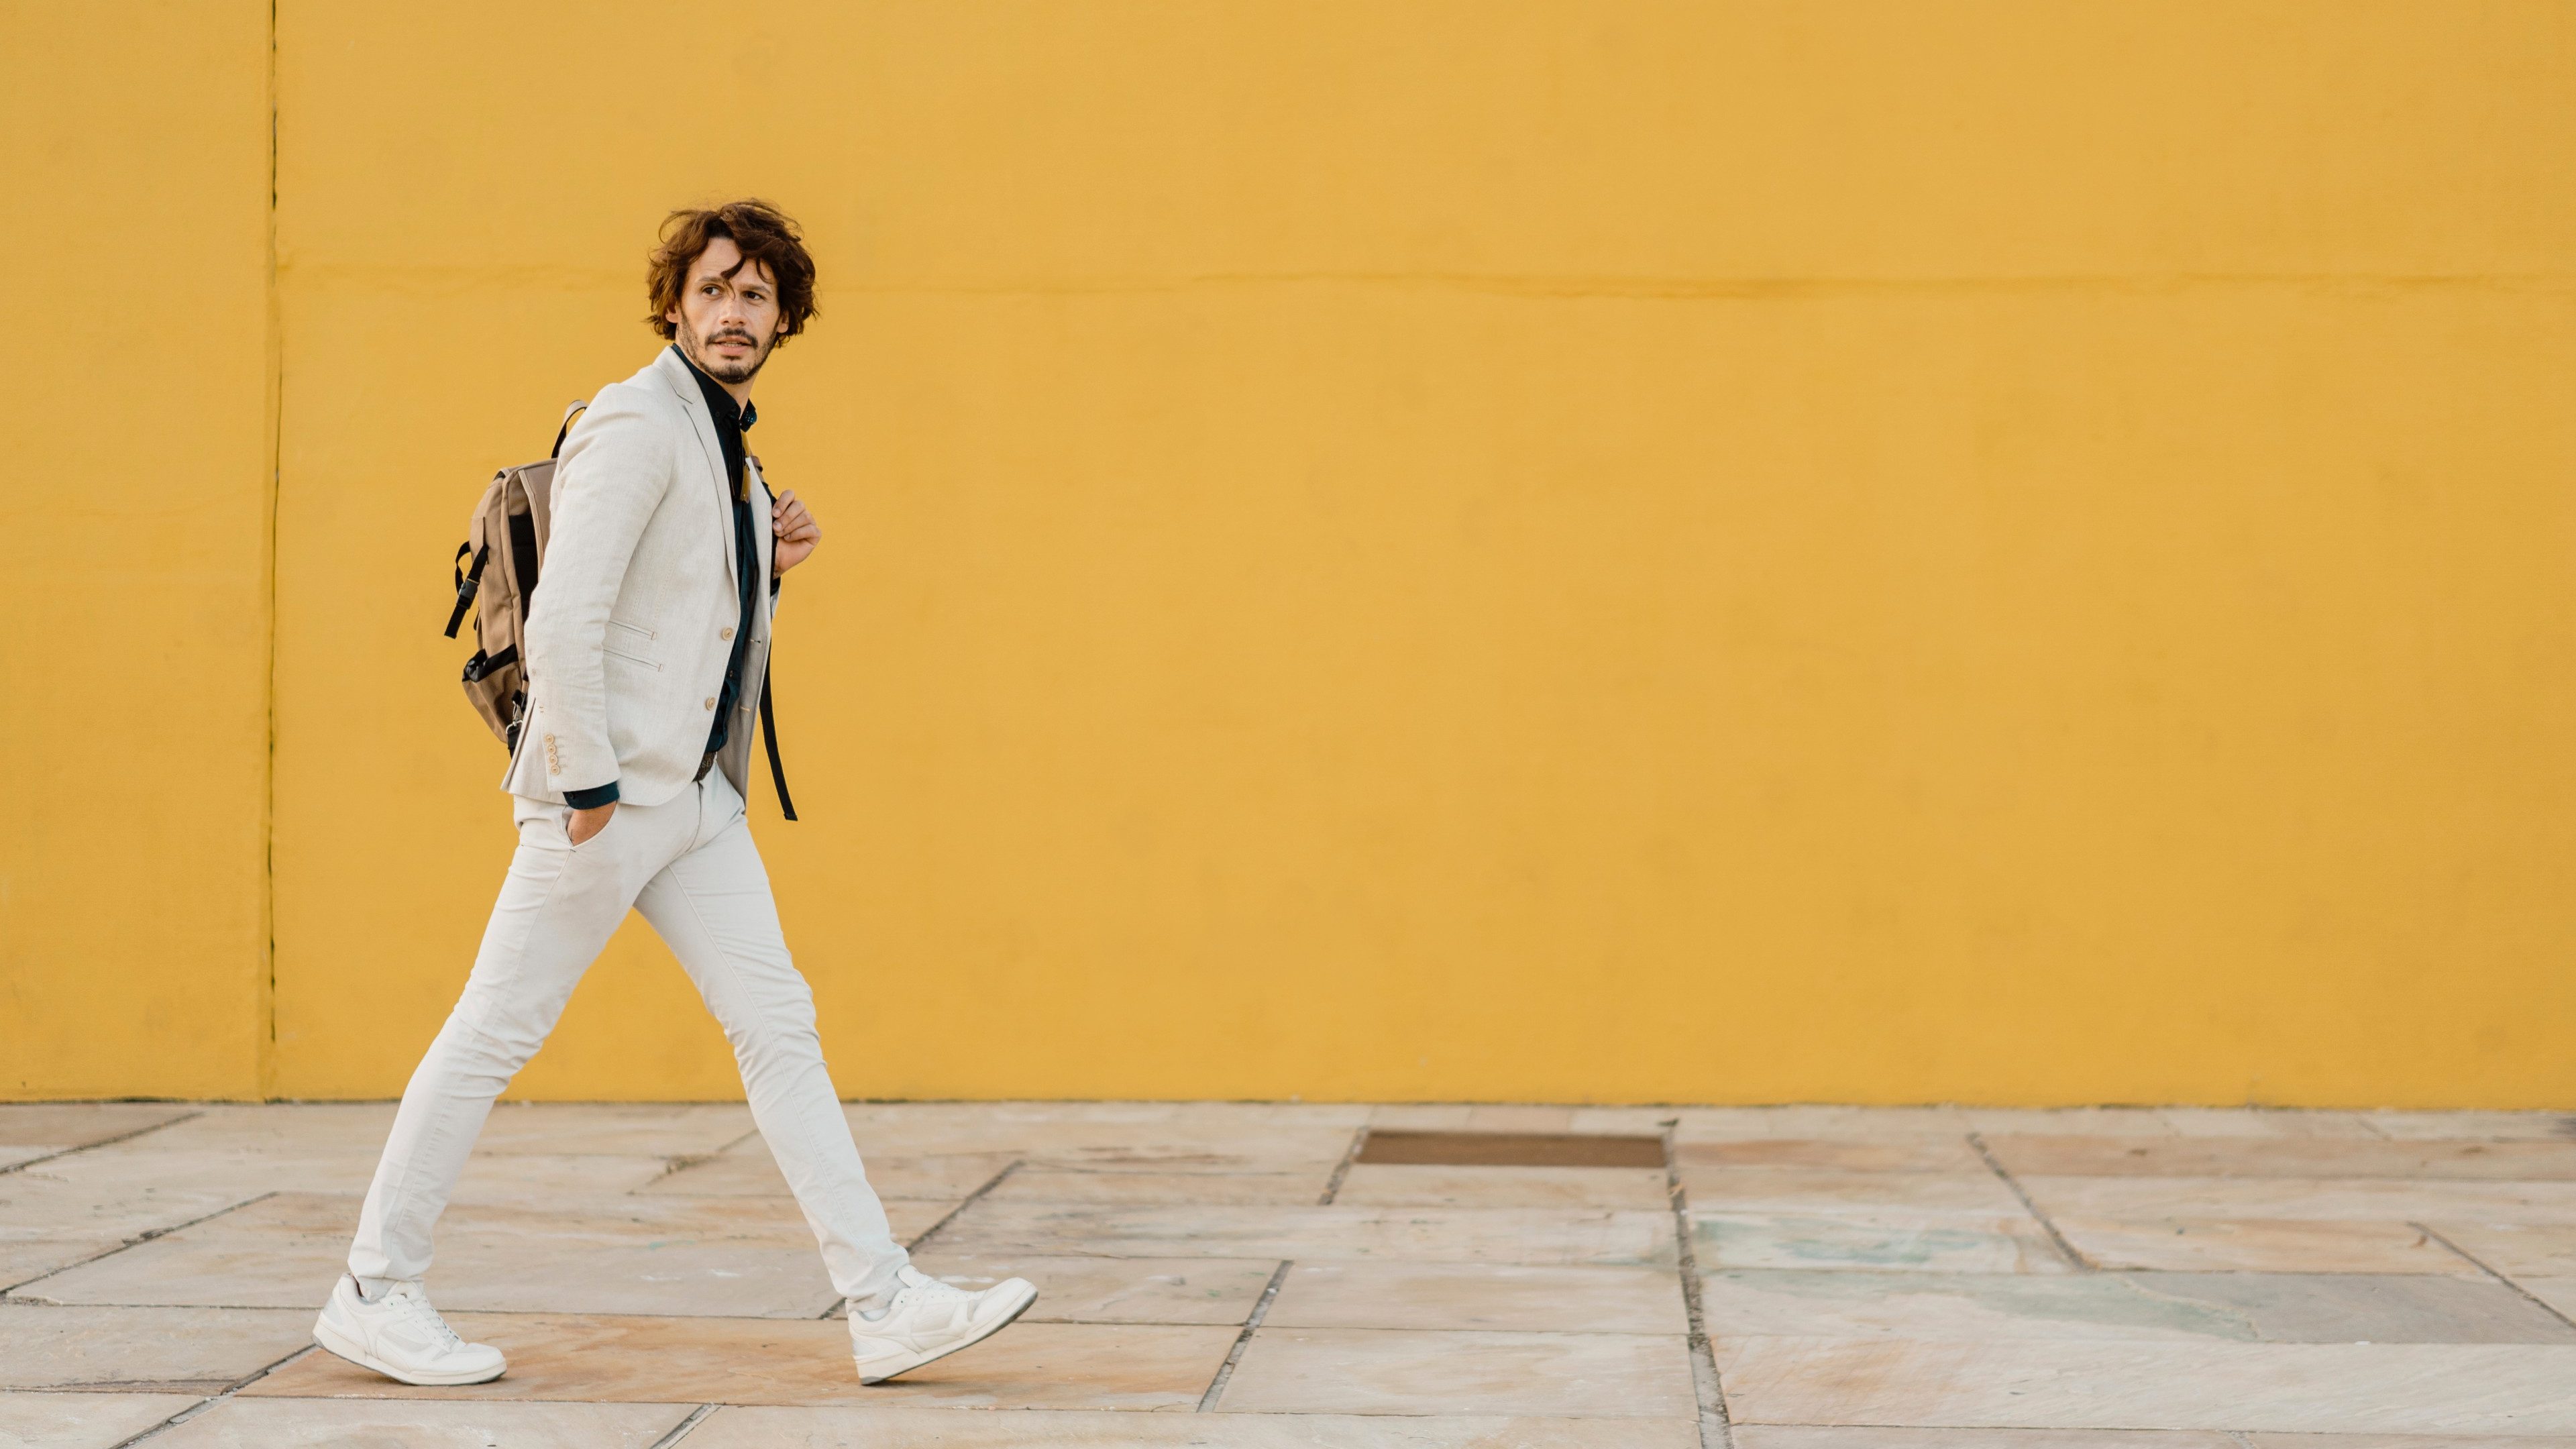 Portrait of walking businessman with backpack in front of yellow wall